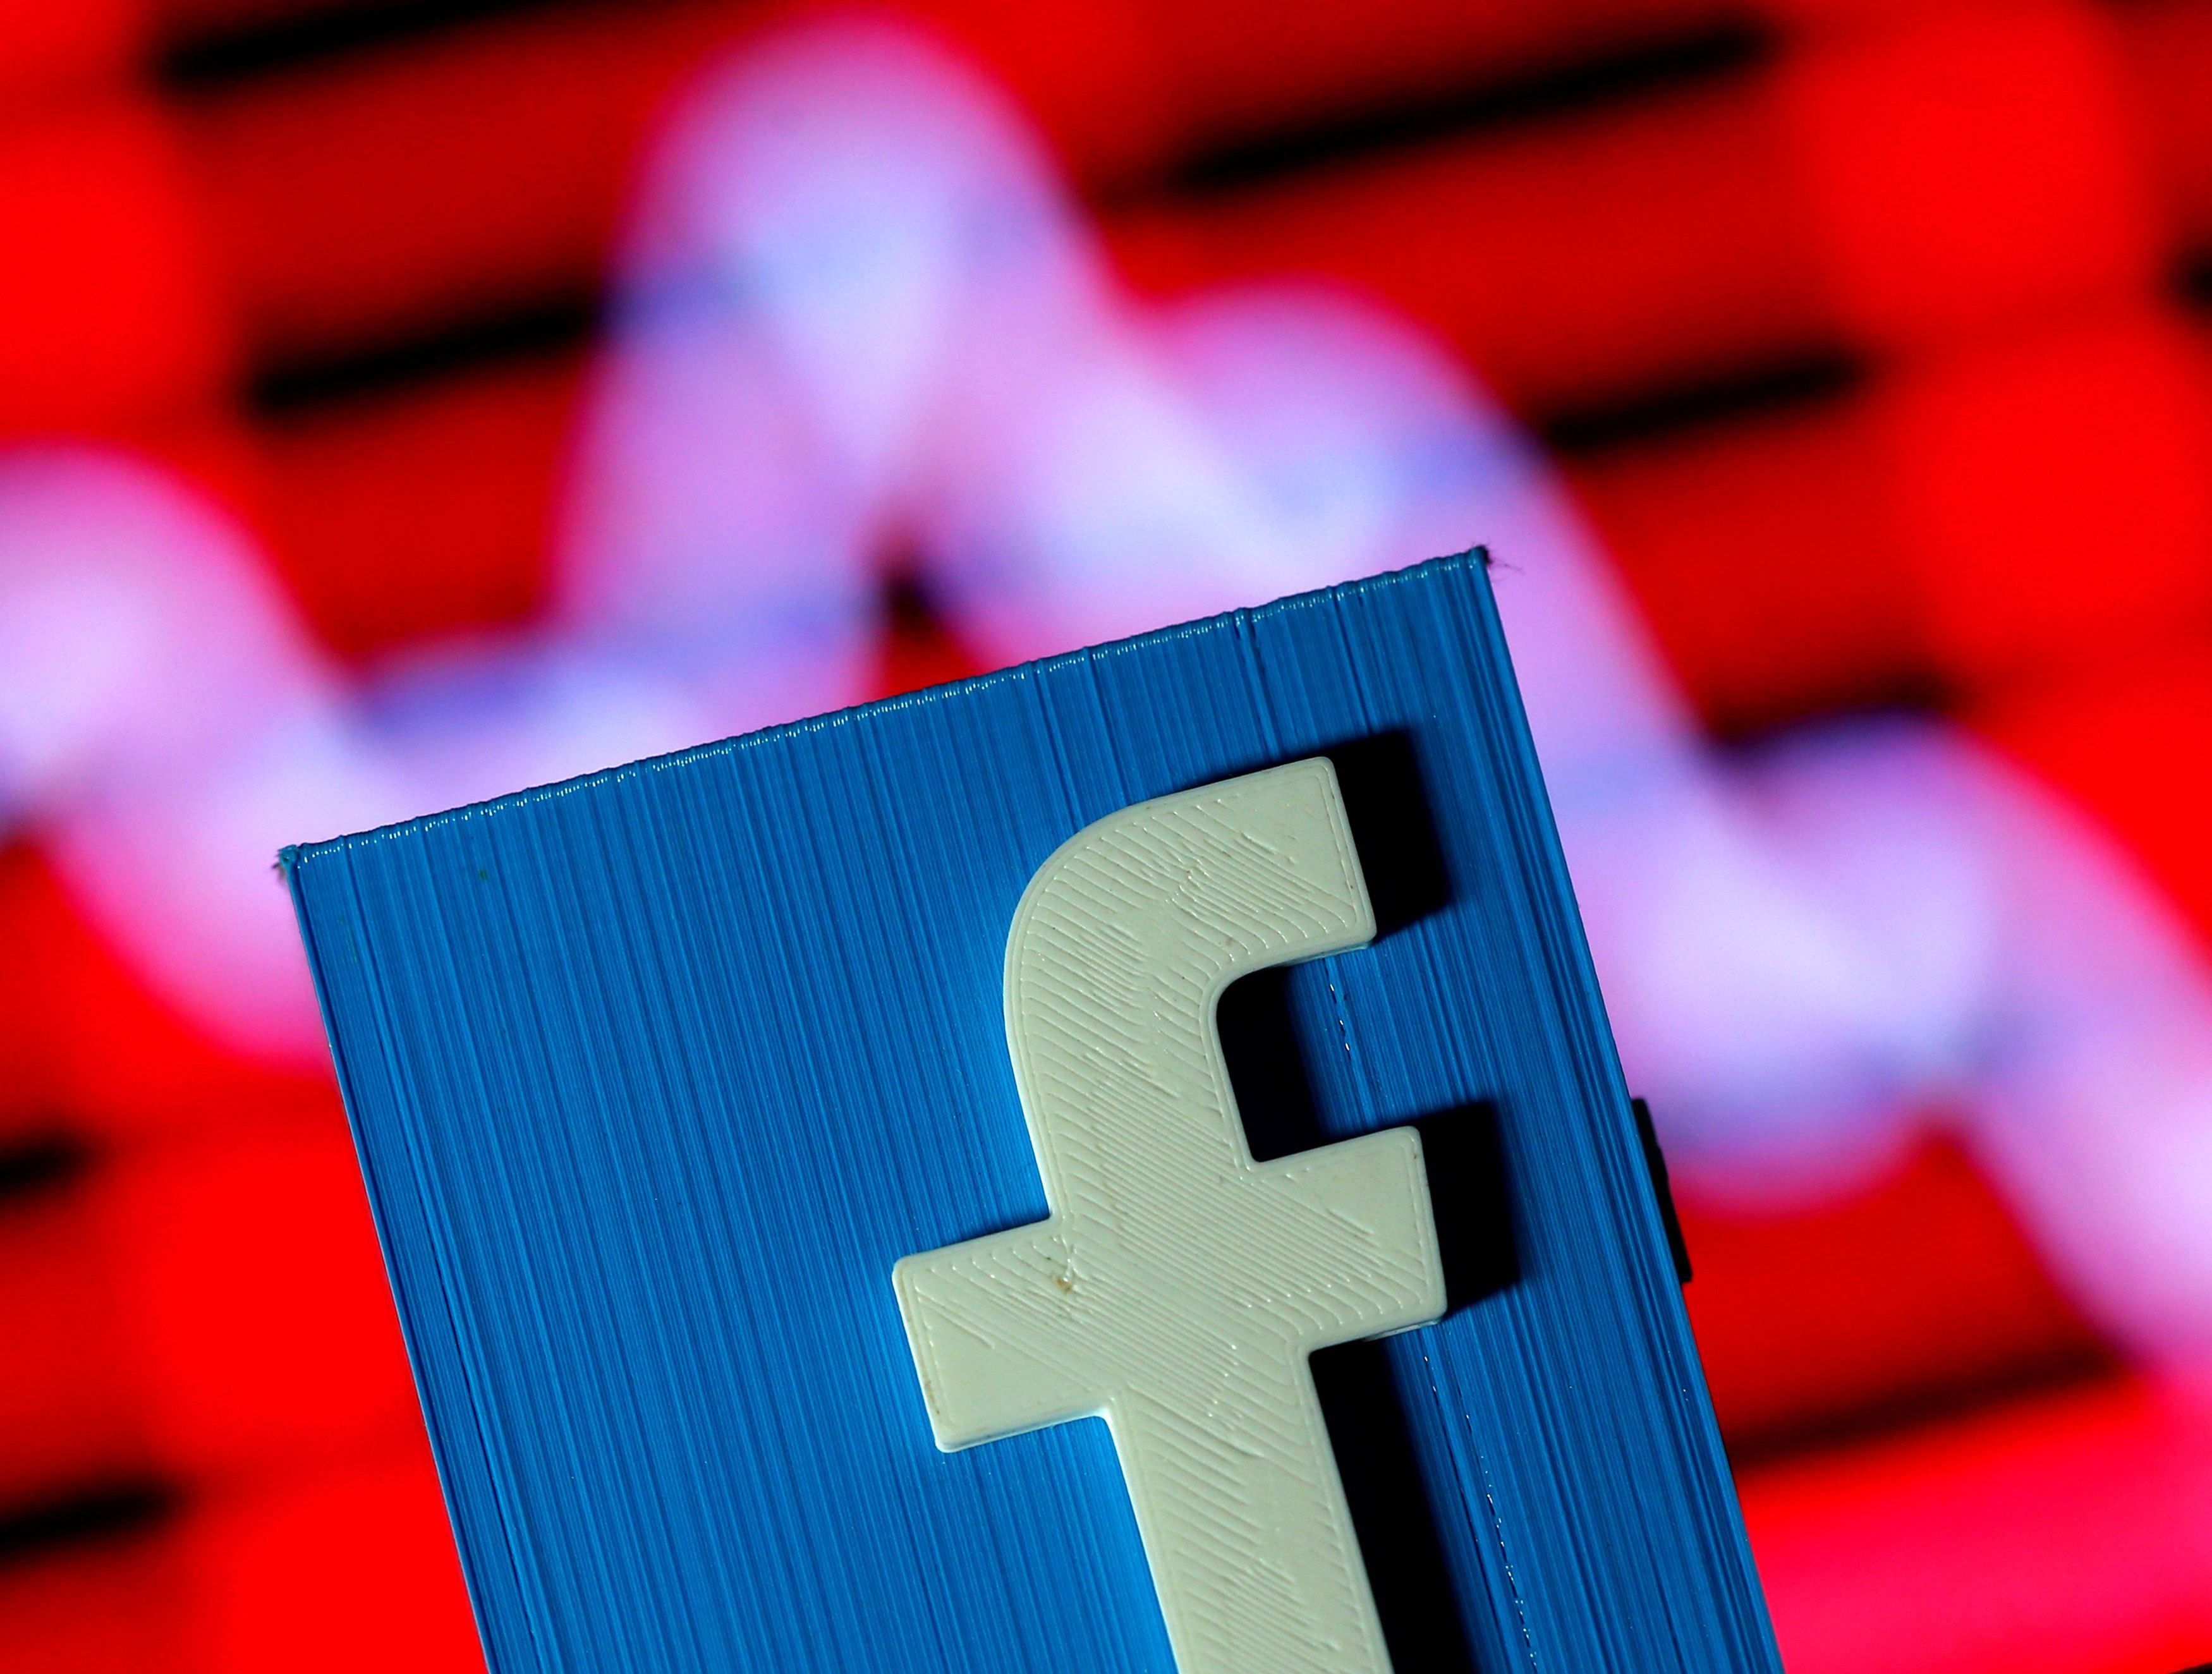 Facebook temporarily shuts stock trading group after GameStop frenzy